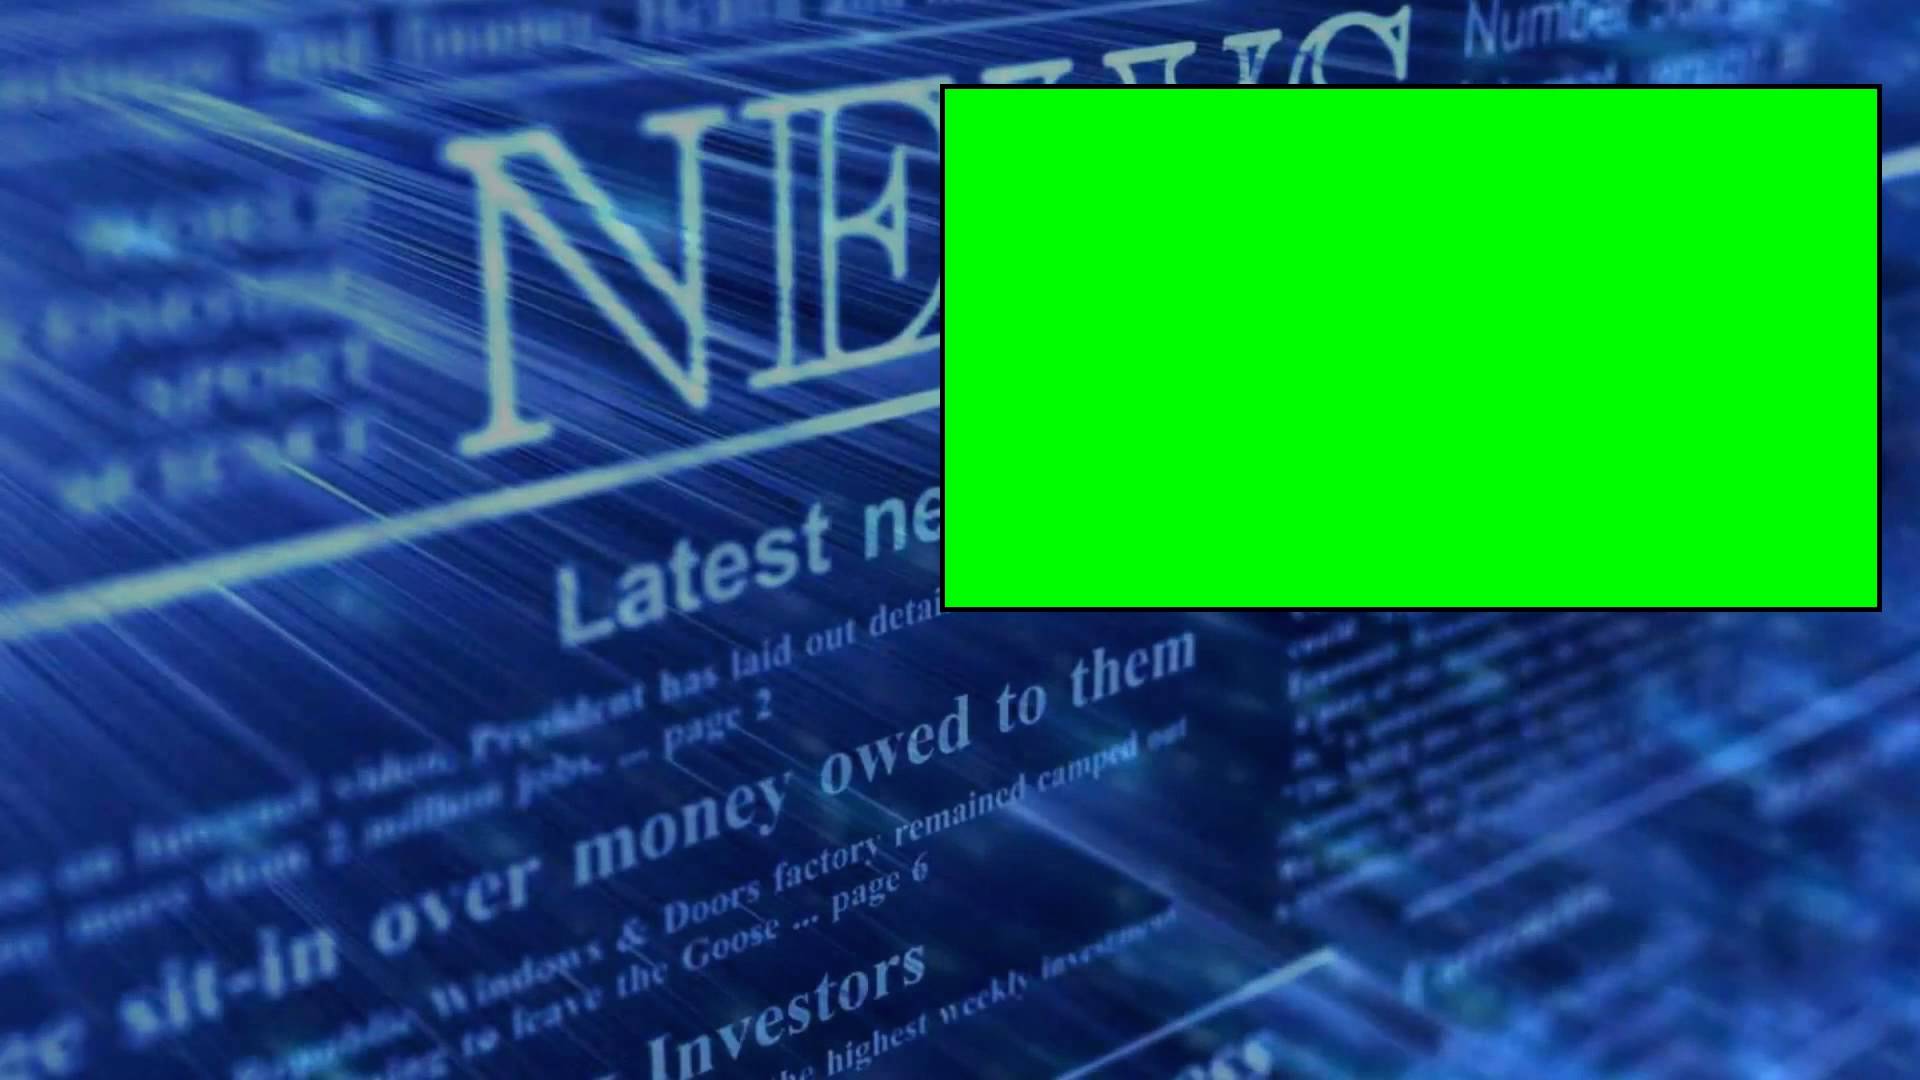 News Background 5 Green Screen background video 1080p HD